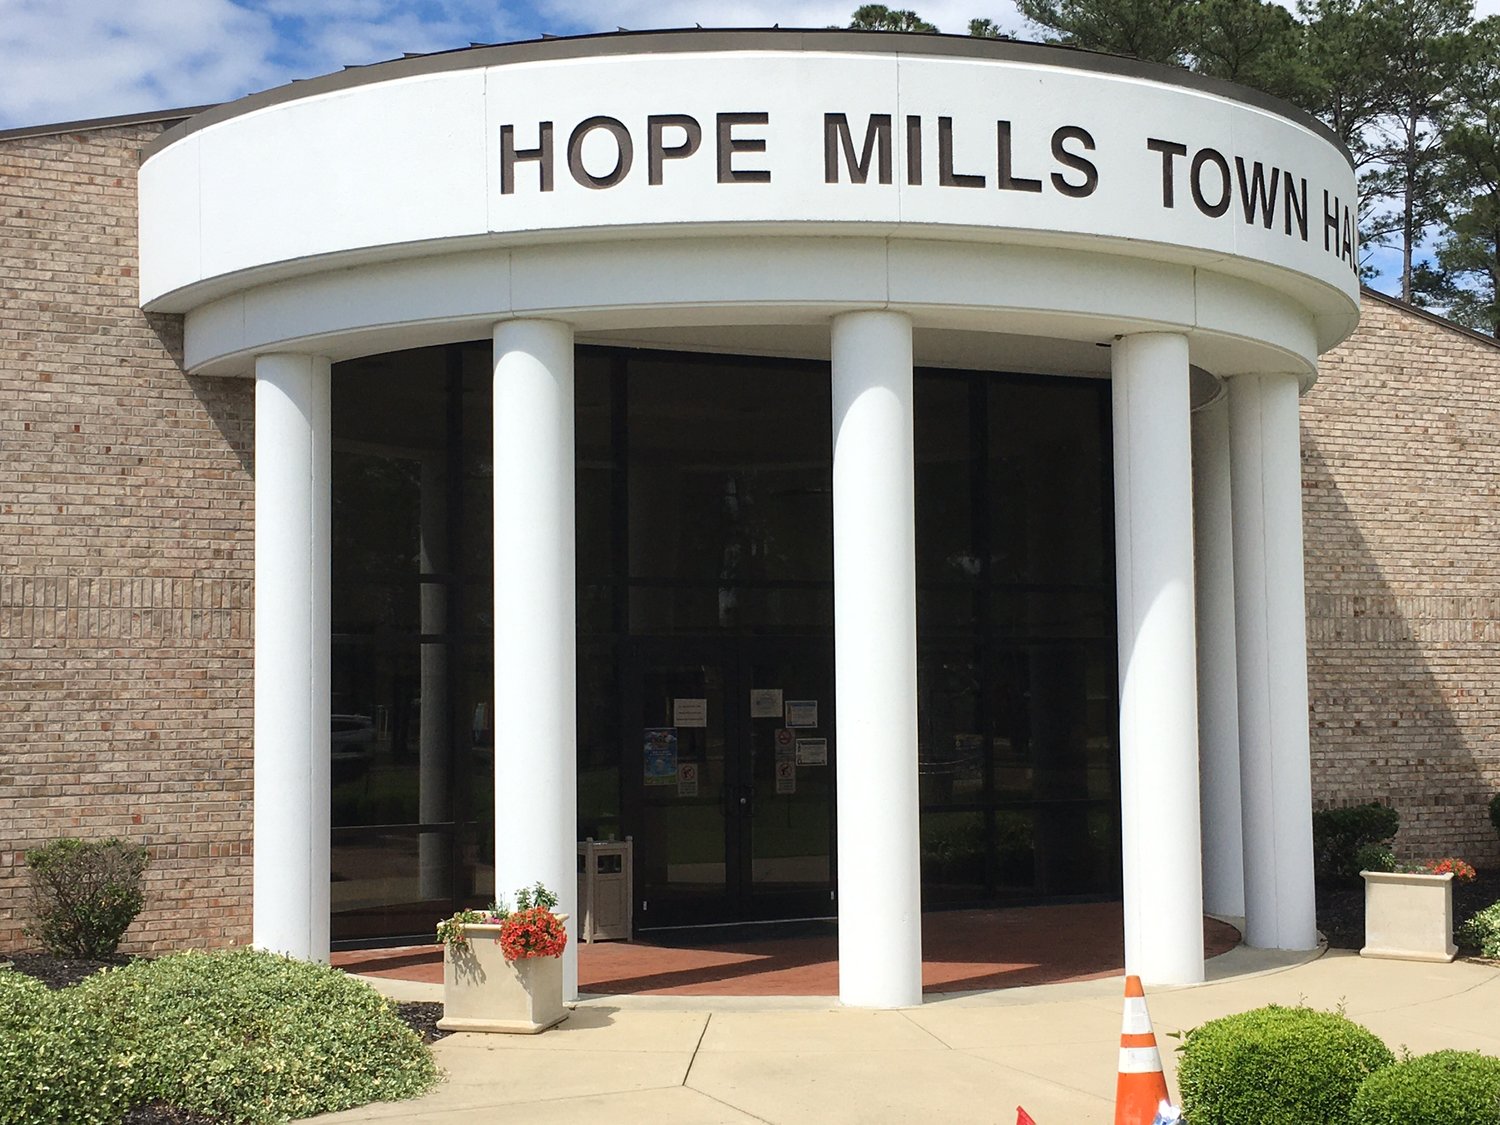 The Hope Mills Board of Commissioners held a special work session Monday night to discuss the development of an overlay zoning district that will help guide development in the town.